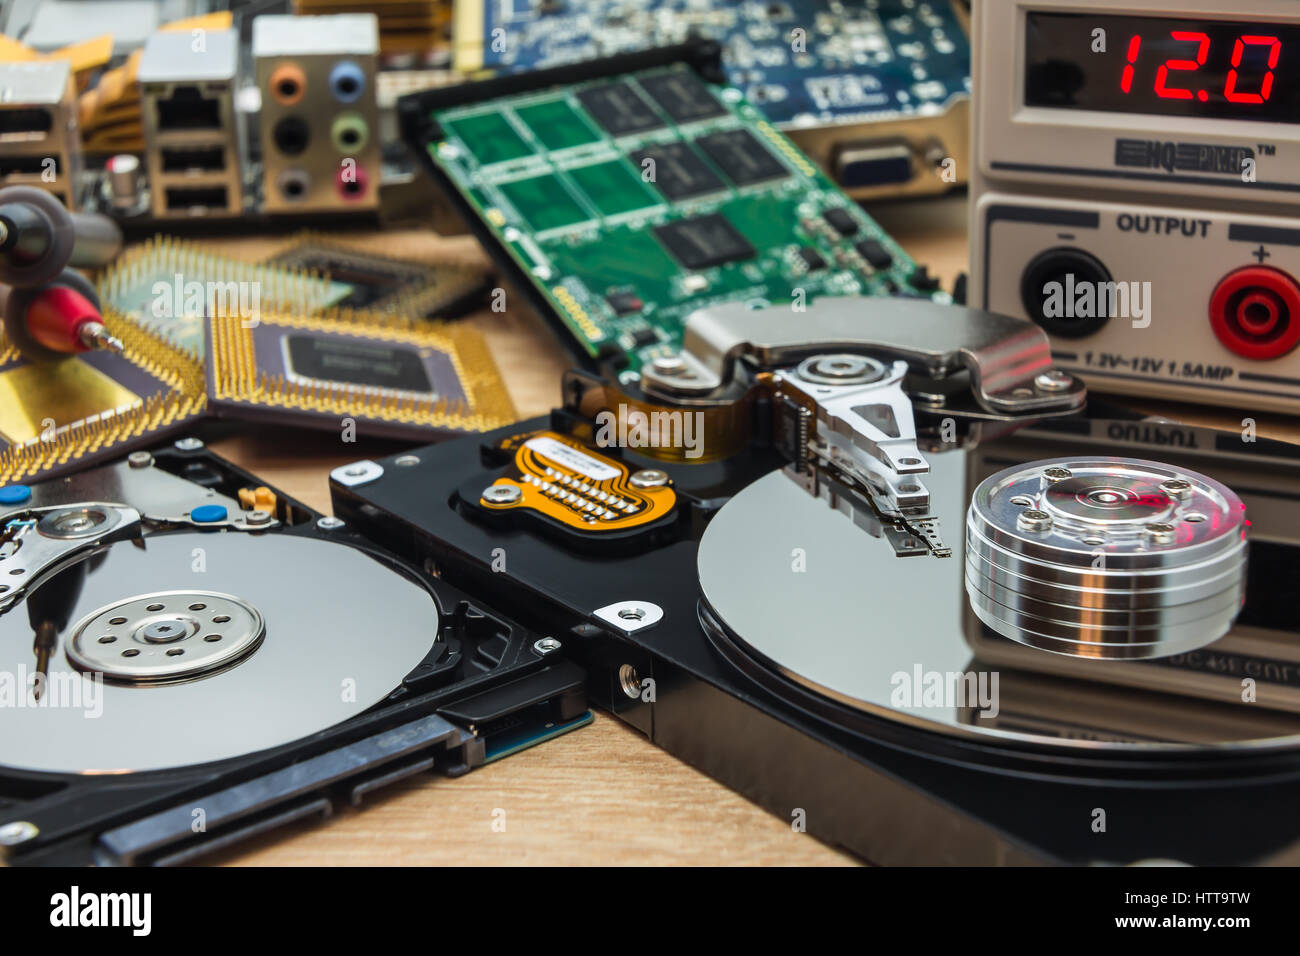 open faulty HDD and SSD in a service laboratory ready for data recovery or  repair Stock Photo - Alamy